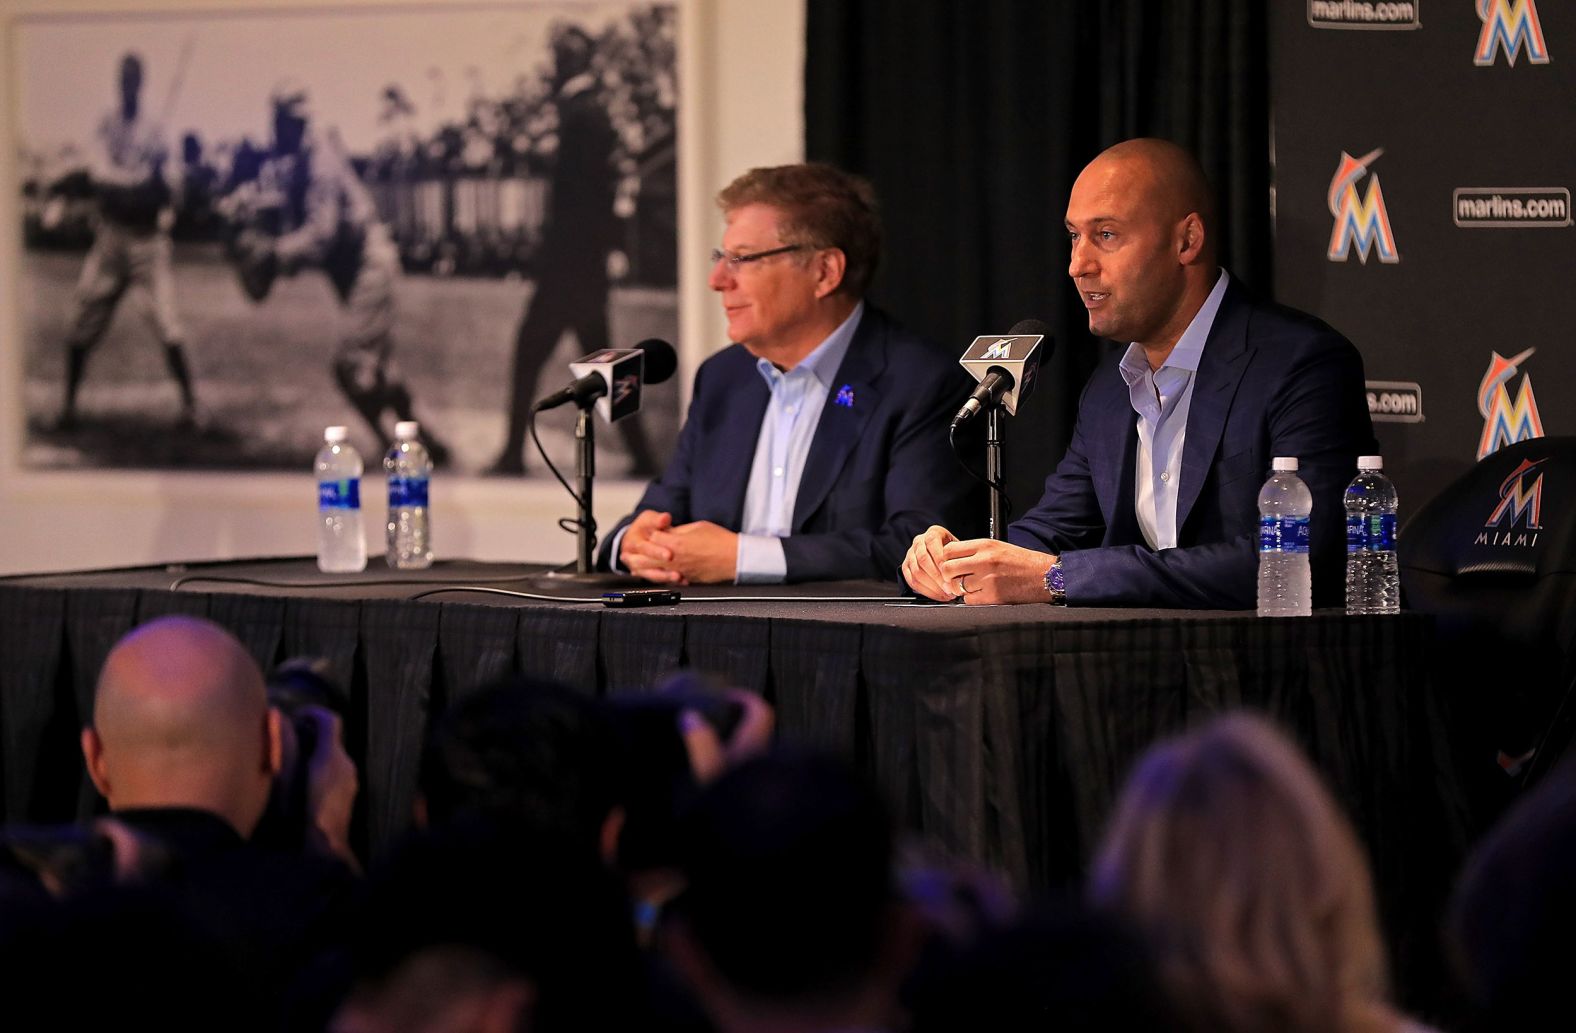 Jeter became CEO and part owner of the Miami Marlins in 2017. Here, he speaks to the media along with principal owner Bruce Sherman in October 2017.